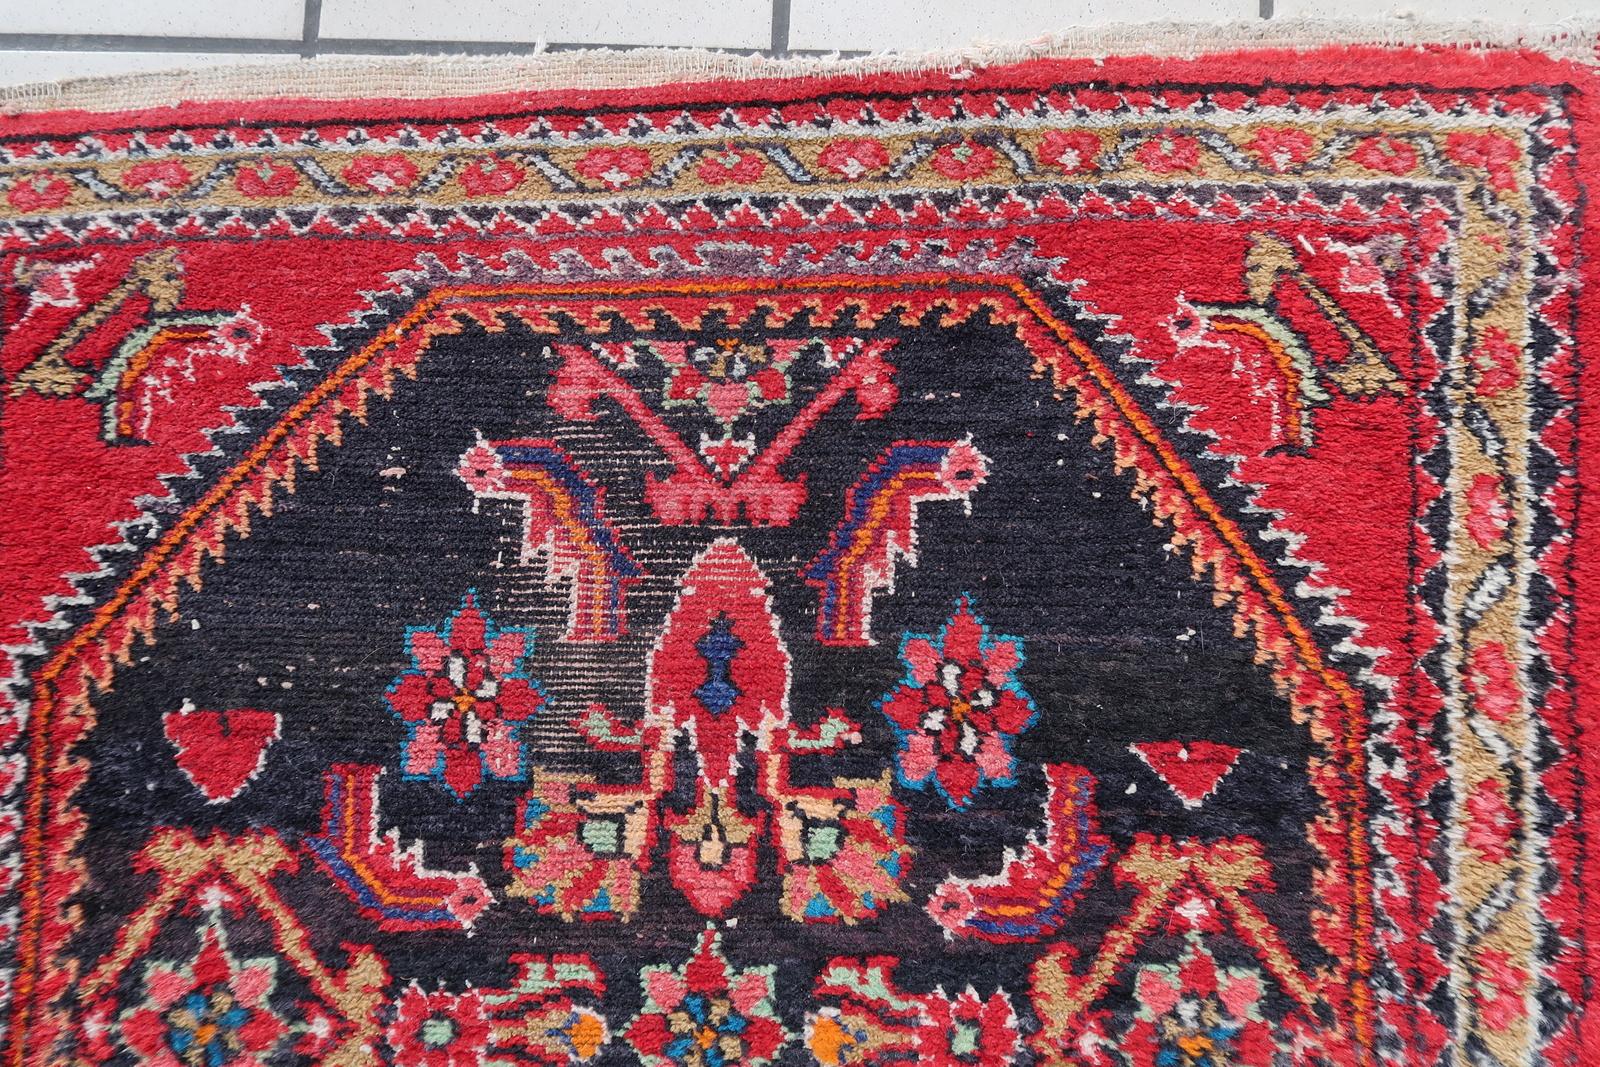 Hand-Knotted Handmade Vintage Persian Hamadan Rug 2.4' x 4.2', 1960s - 1C1139 For Sale